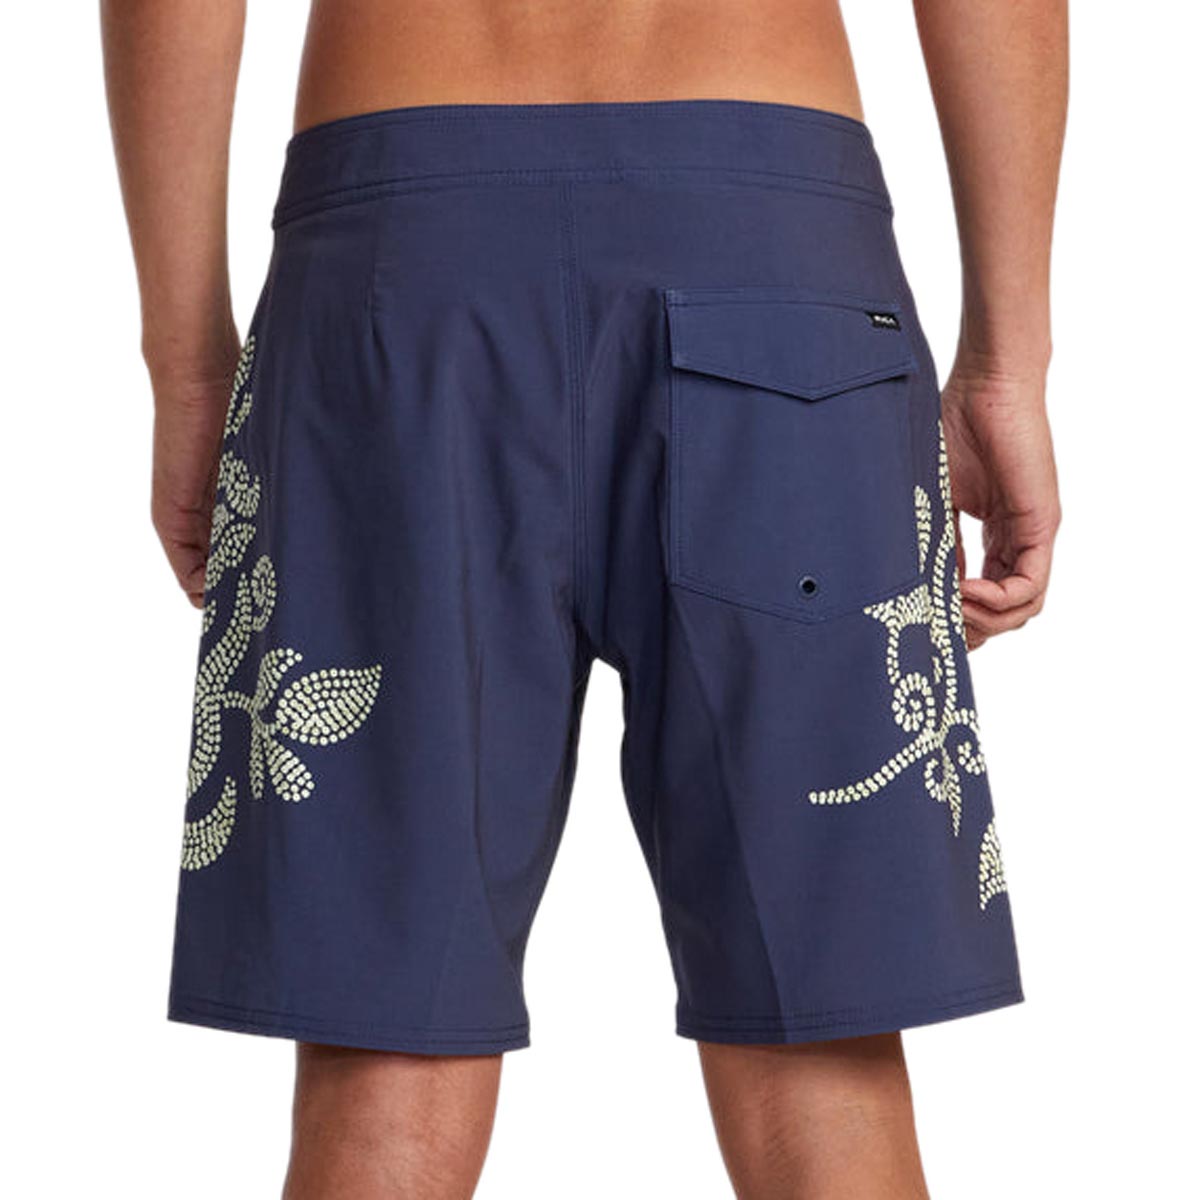 RVCA Displaced Board Shorts - Moody Blue image 3